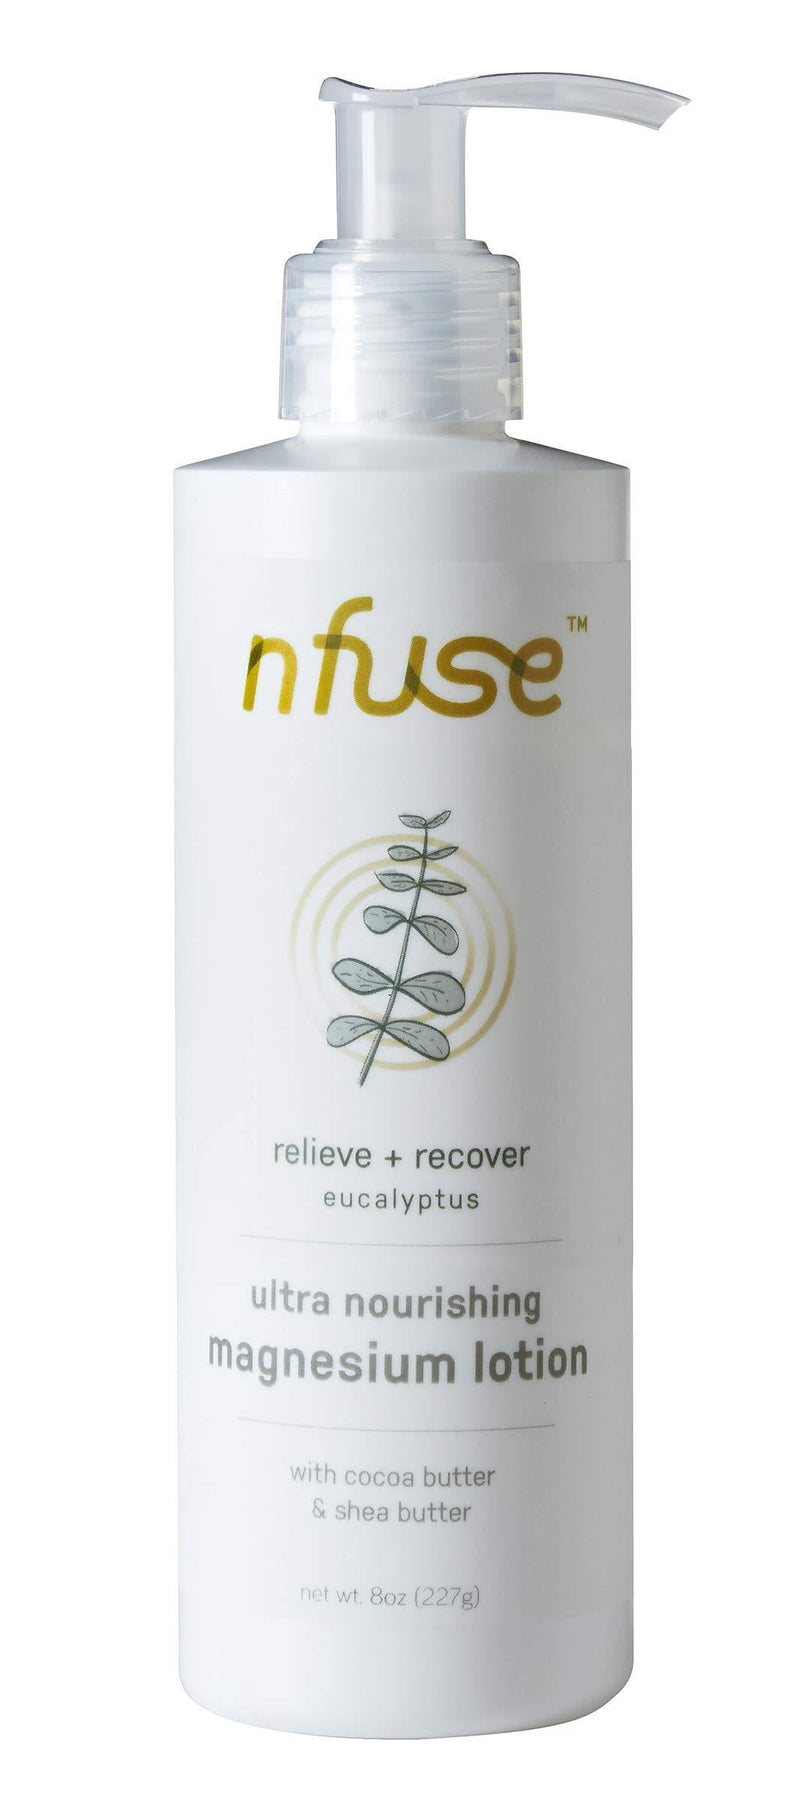 [Australia] - nfuse Magnesium Body Lotion - Mg++ Delivery Technology - Pure Magnesium Chloride U.S.P. - Aromatherapeutic Essential Oils - Eucalyptus: Relieve + Recover - Muscle & Pain Relief - 8 oz 